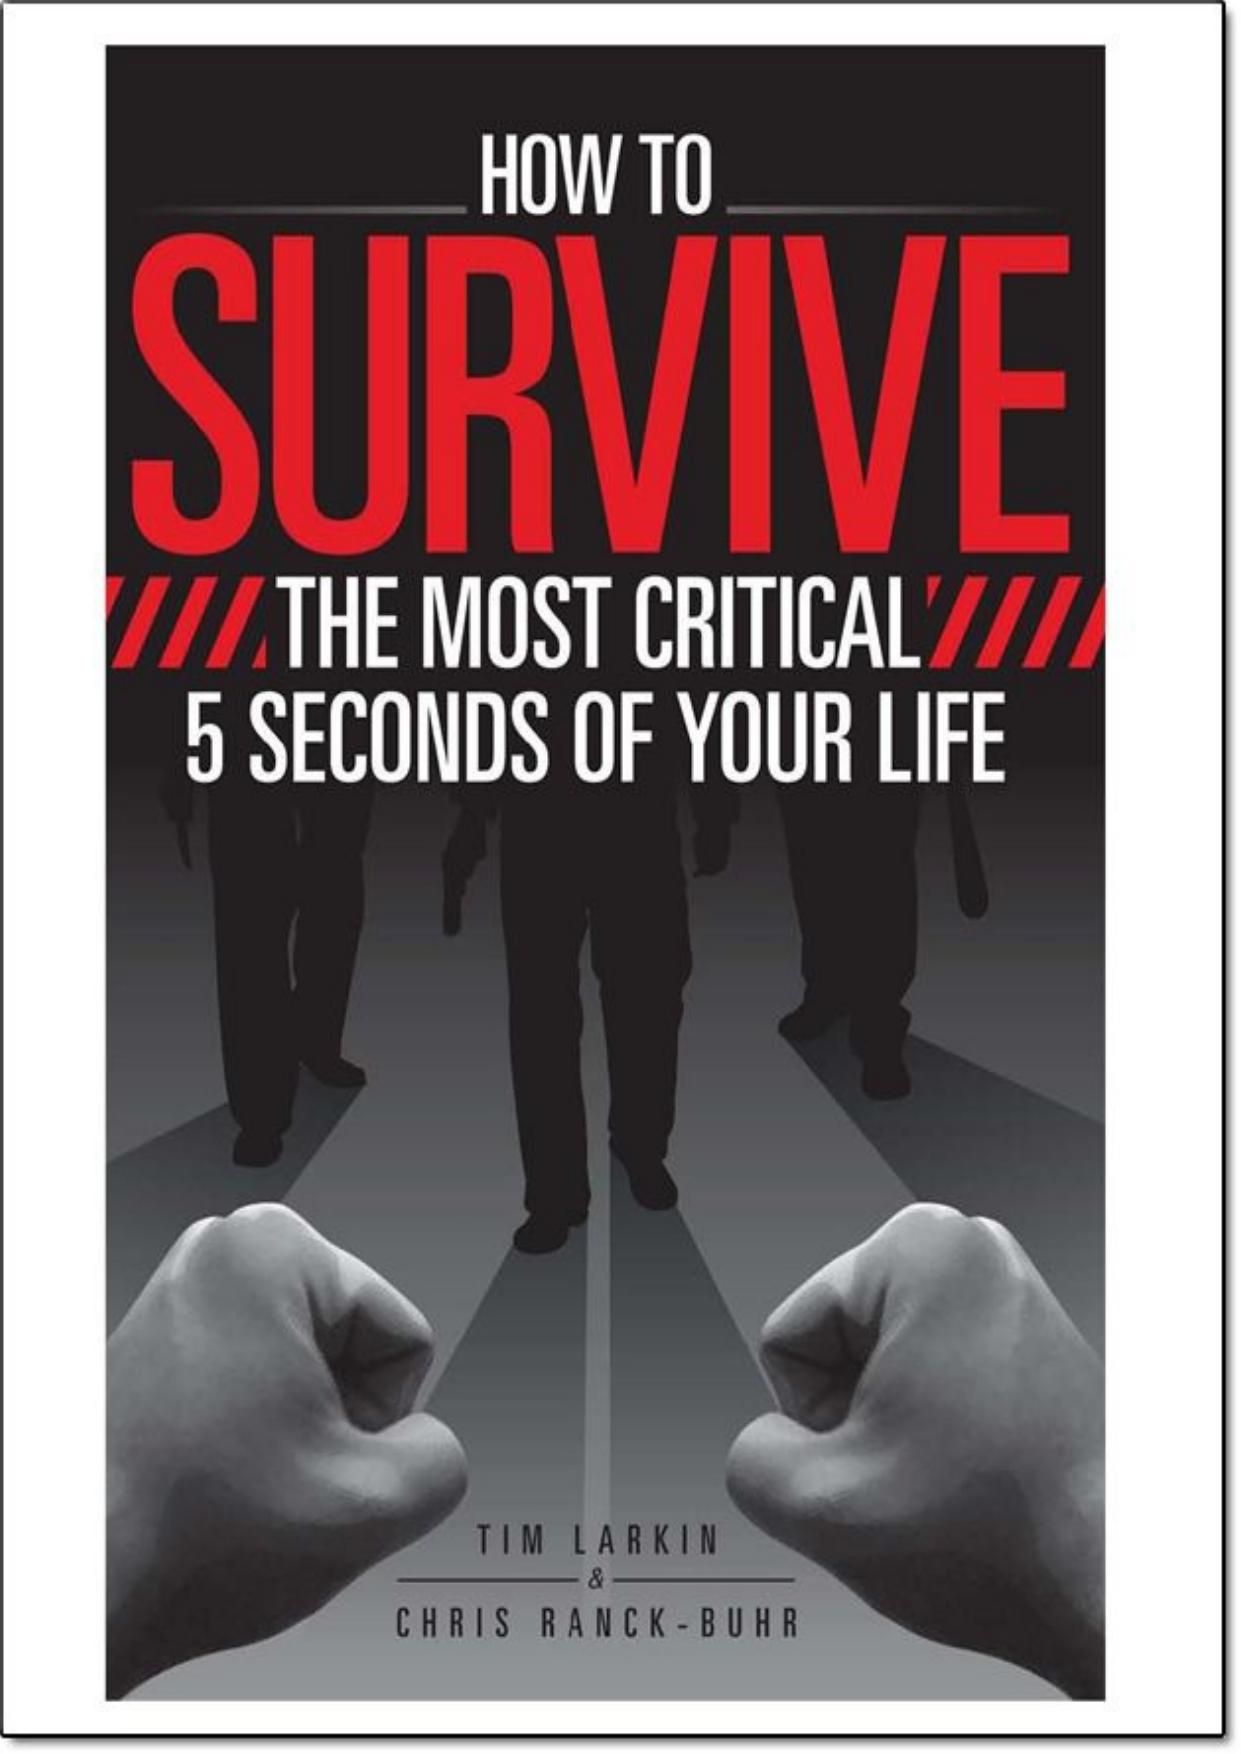 How to Survive the Most Critical 5 Seconds of Your Life